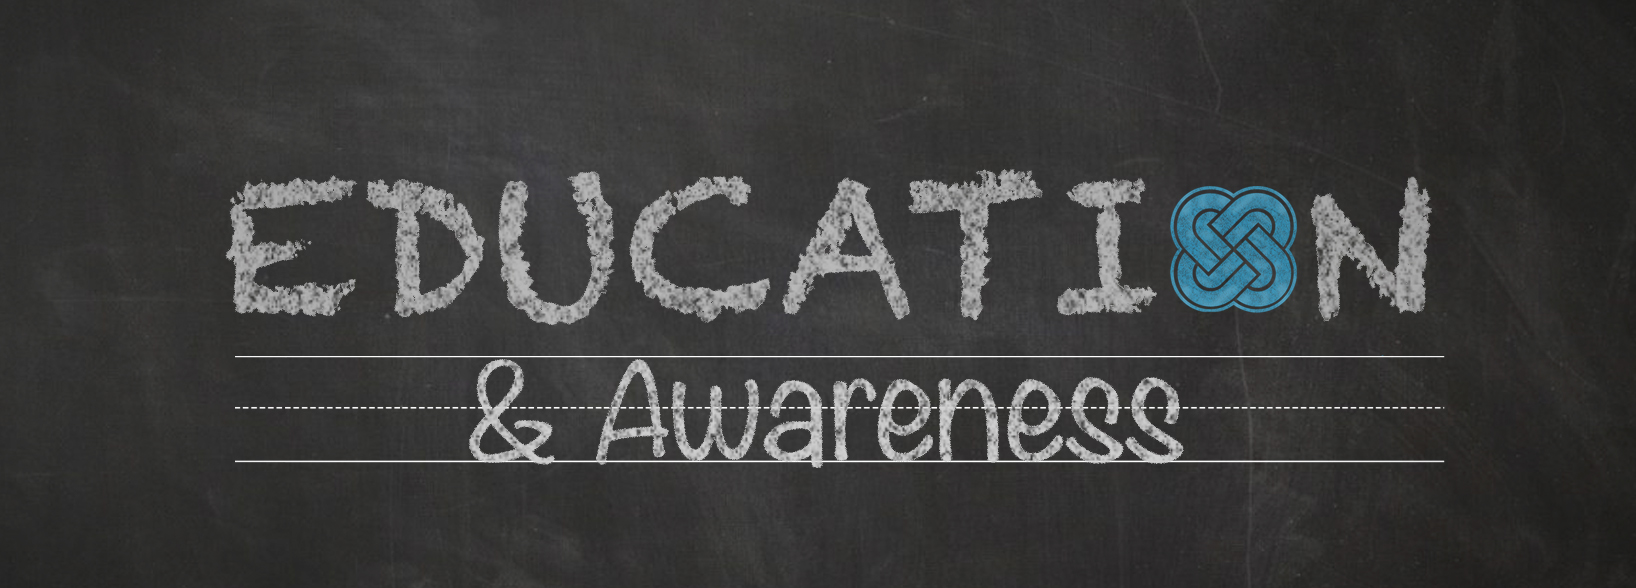 Education and Awareness Banner